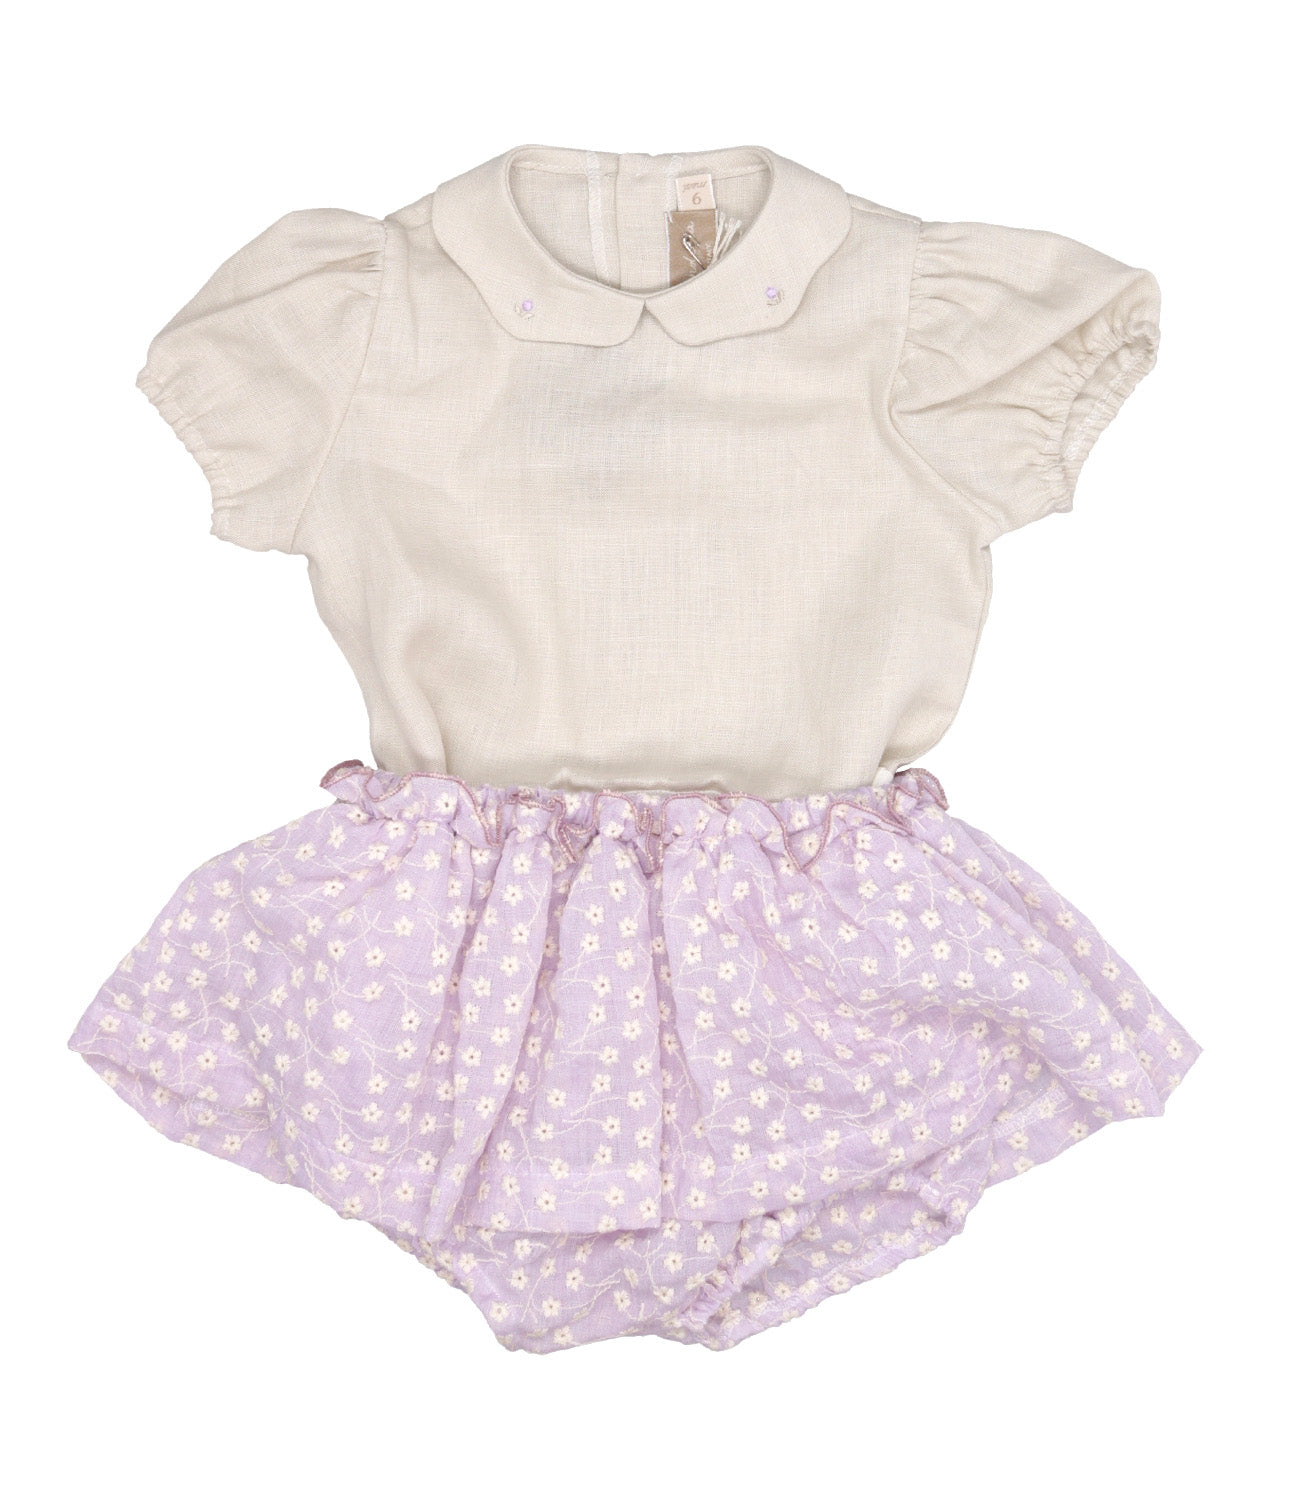 La Stupenderia | Beige and Lilac Sweater and Skirt Set